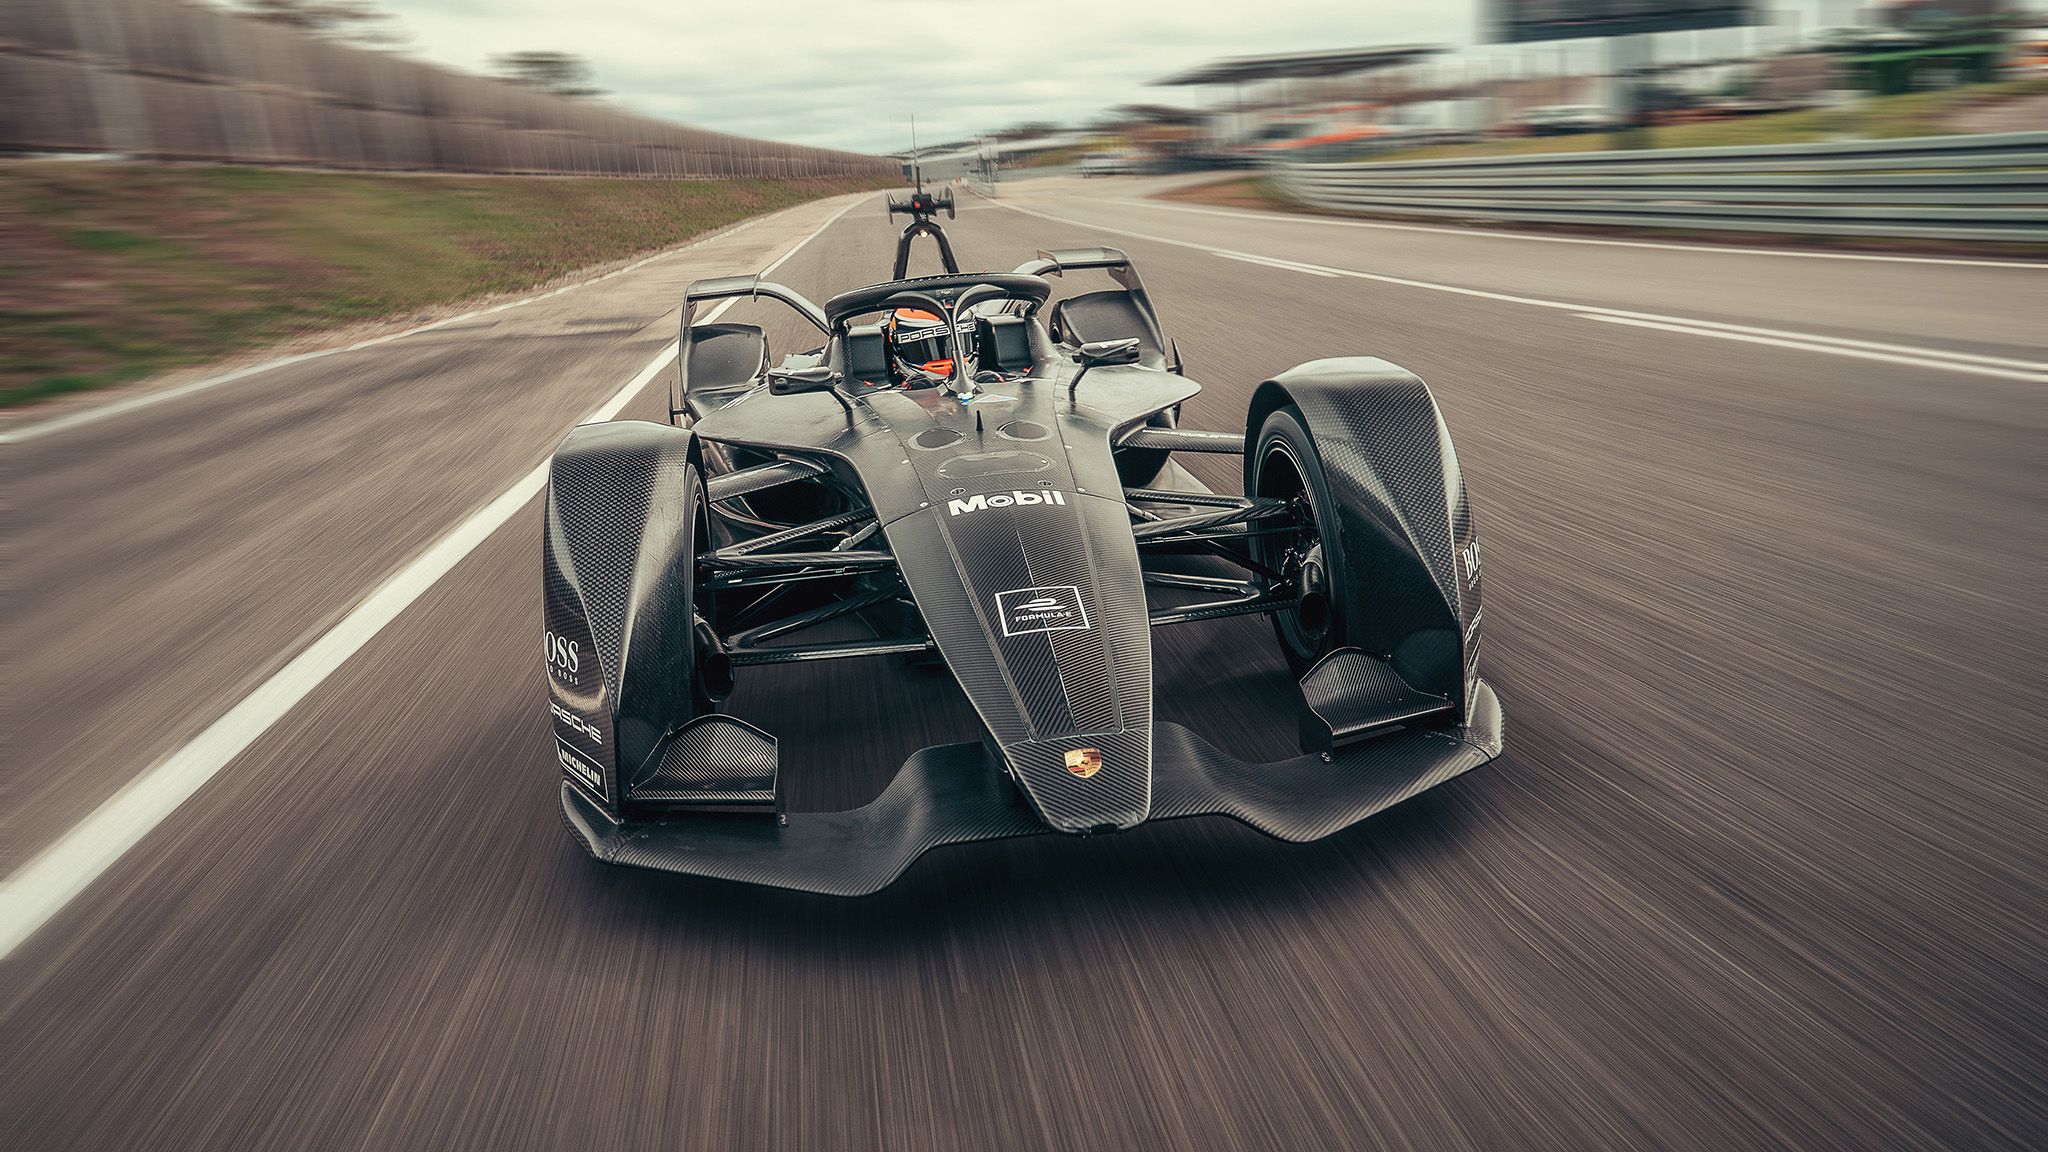 Porsche and Mercedes approach Formula E as proving ground for electric technology